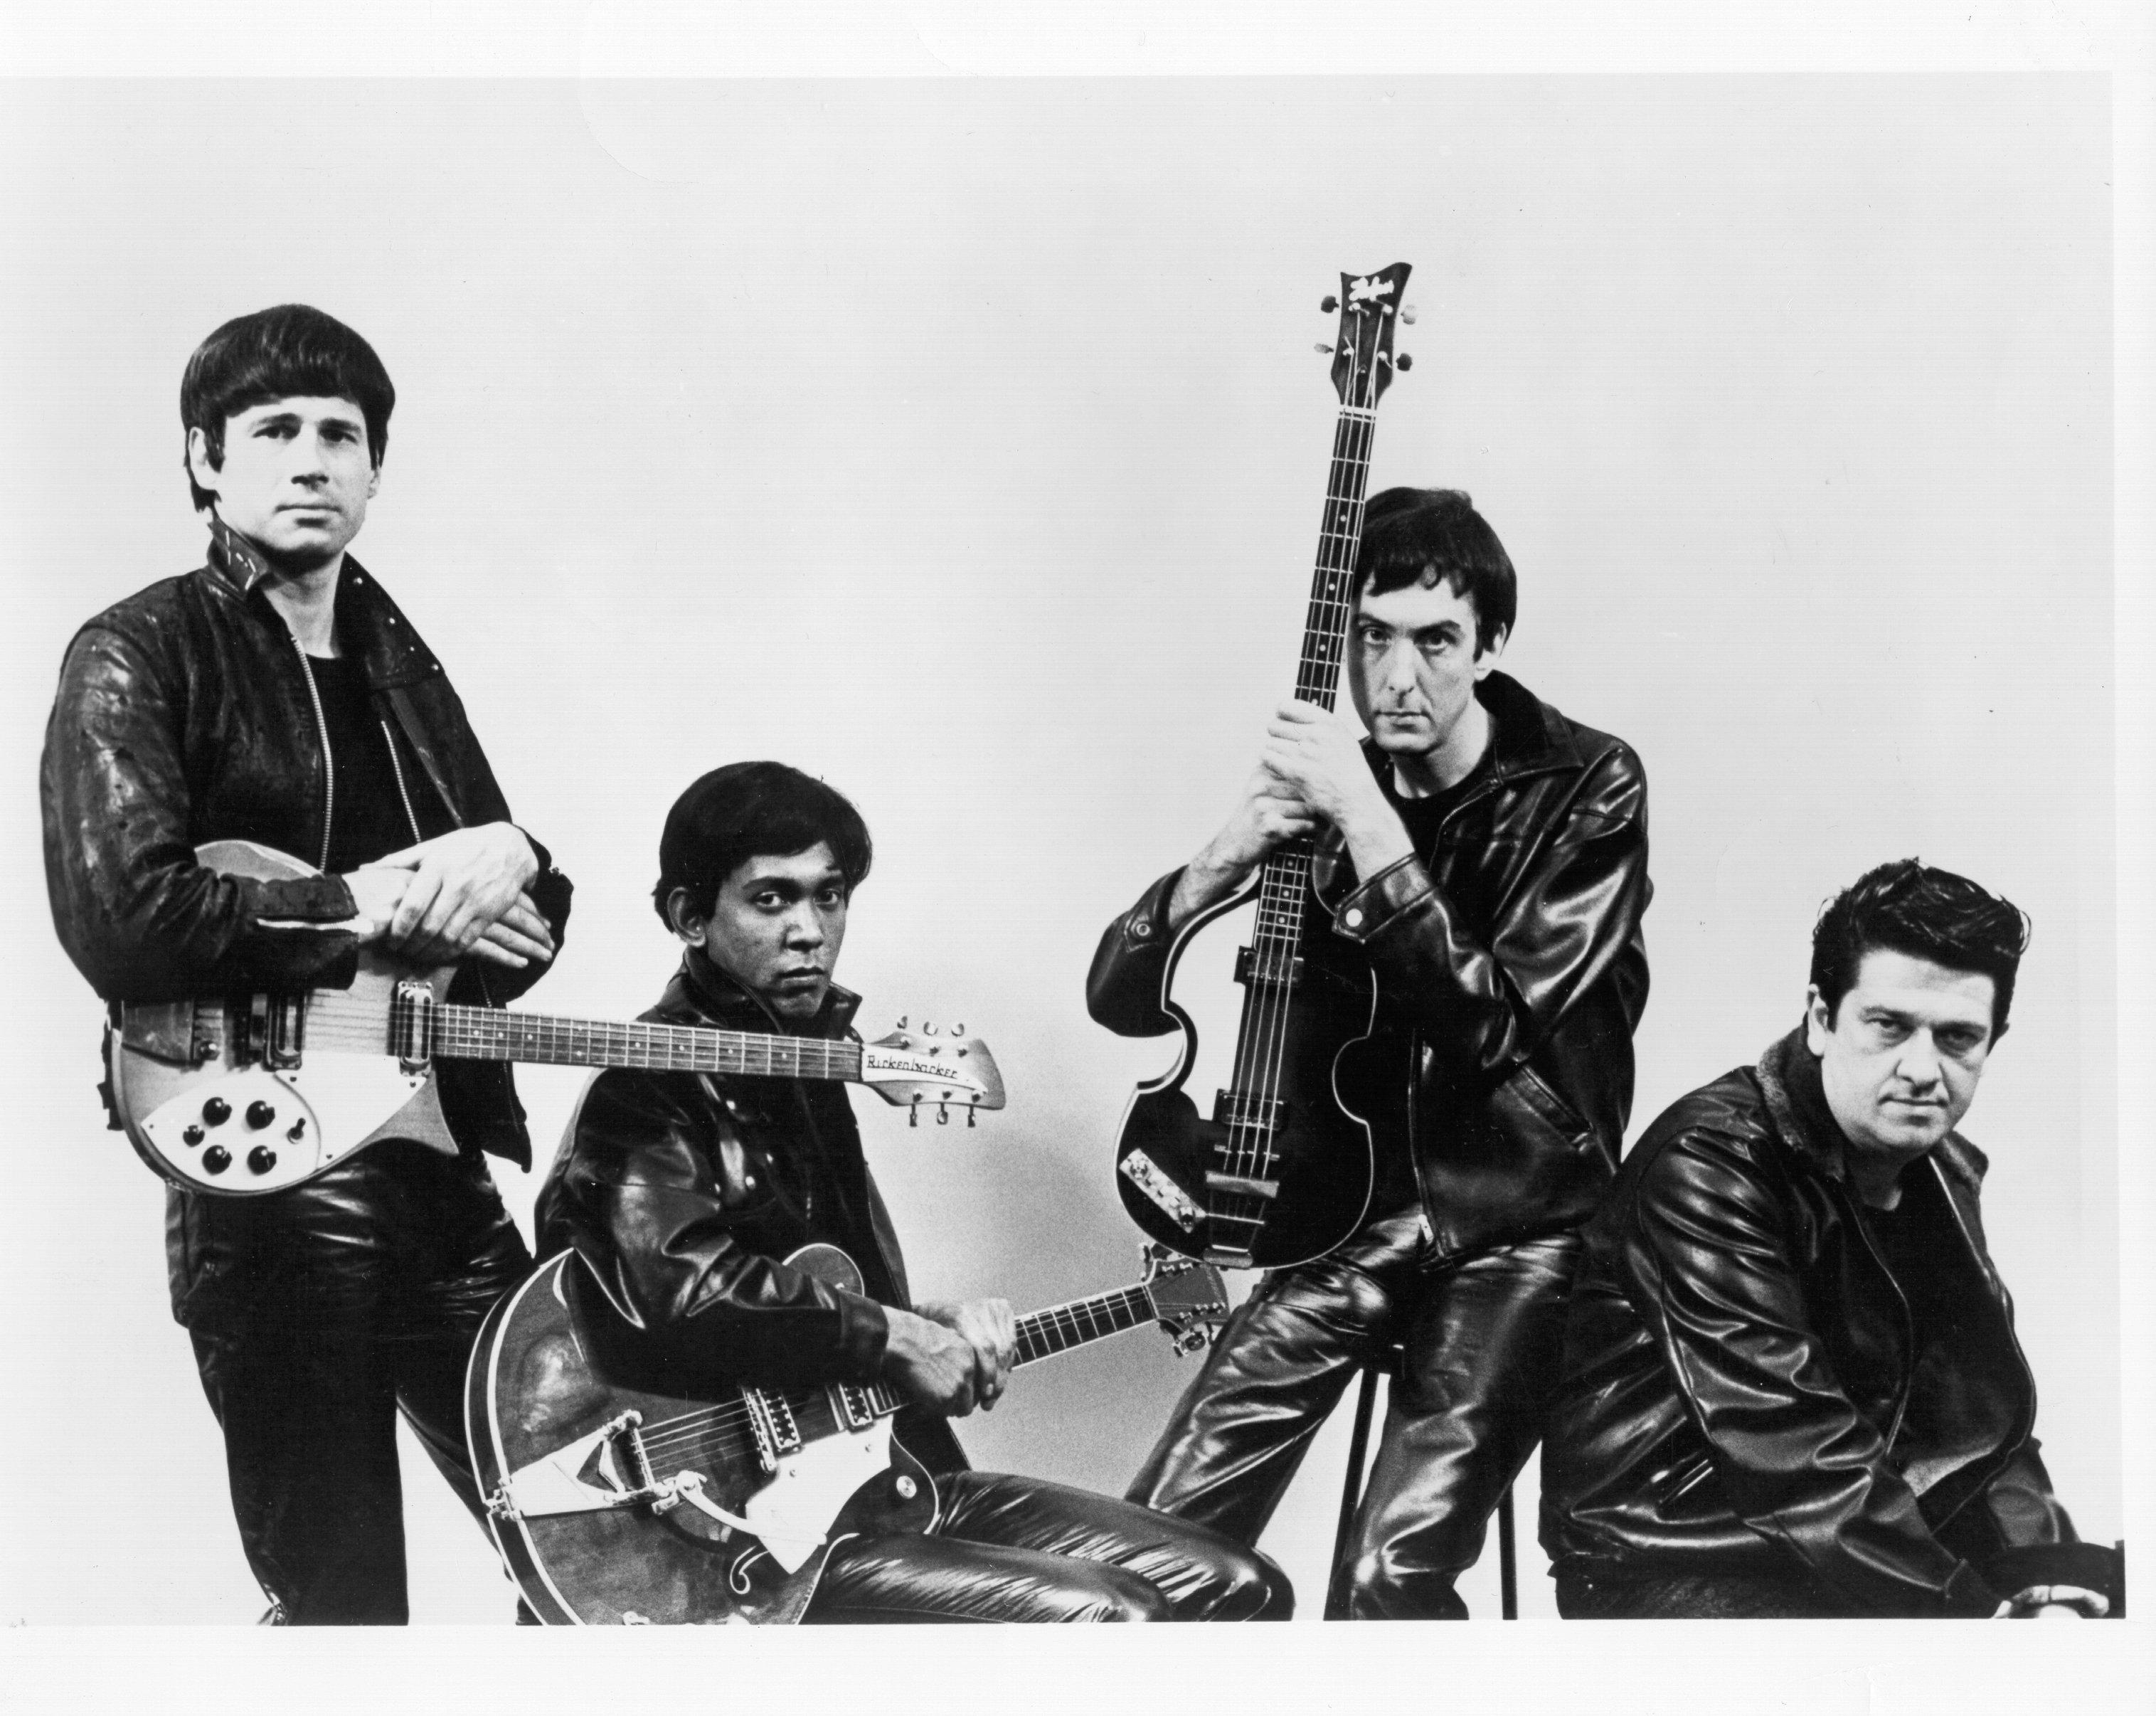 The Rutles dressed like The Beatles during their leather jacket period